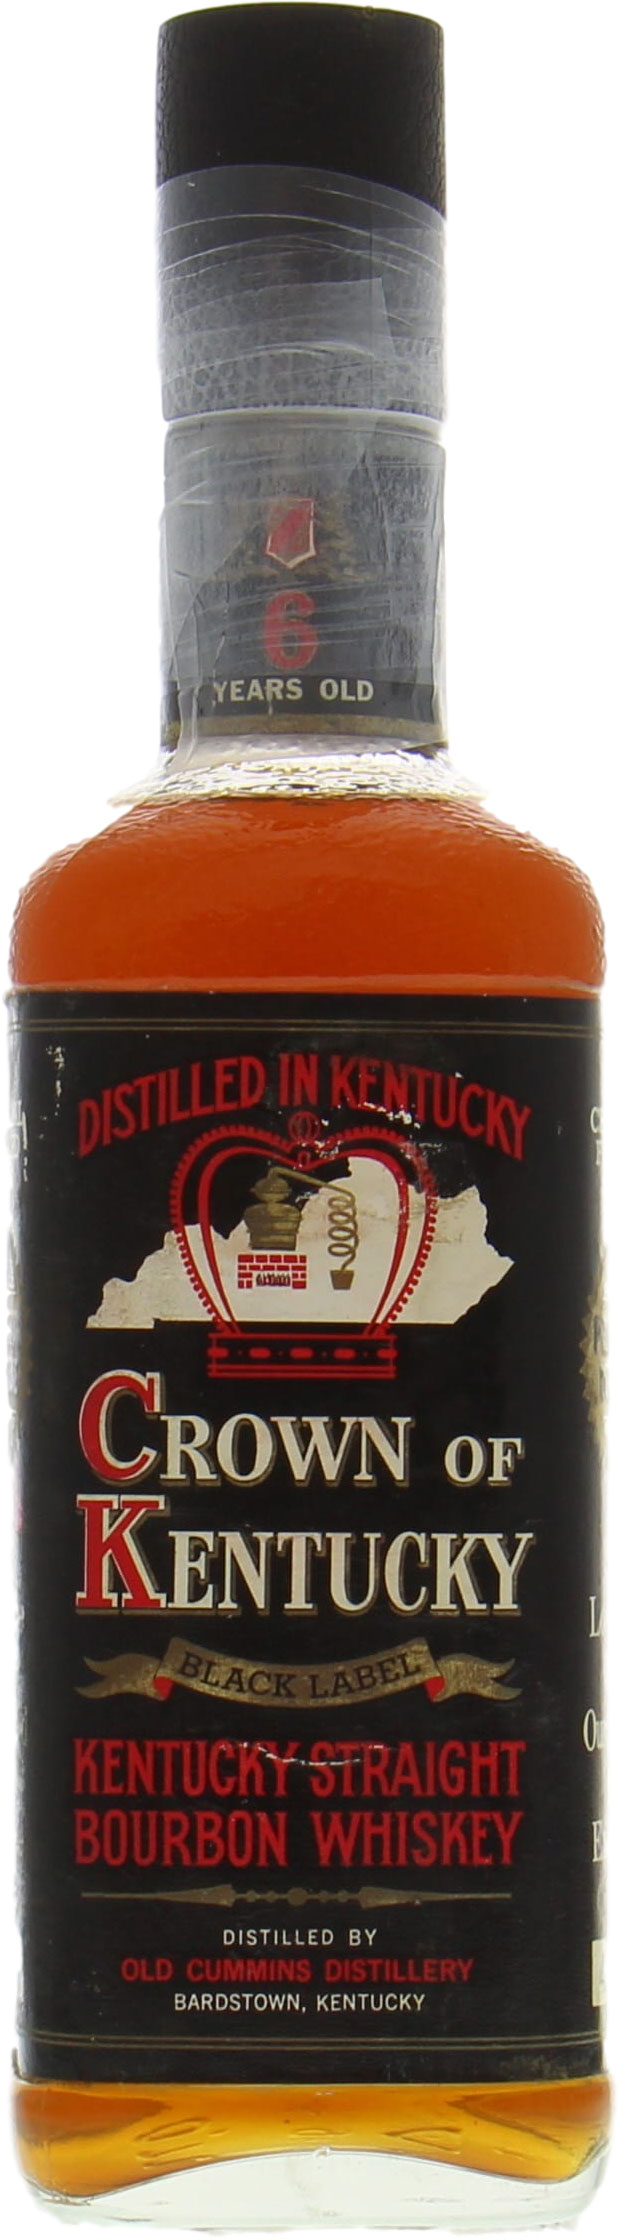 Old Cummins Distillery - 6 Years Old Crown Of Kentucky Black Label 43% NV Perfect